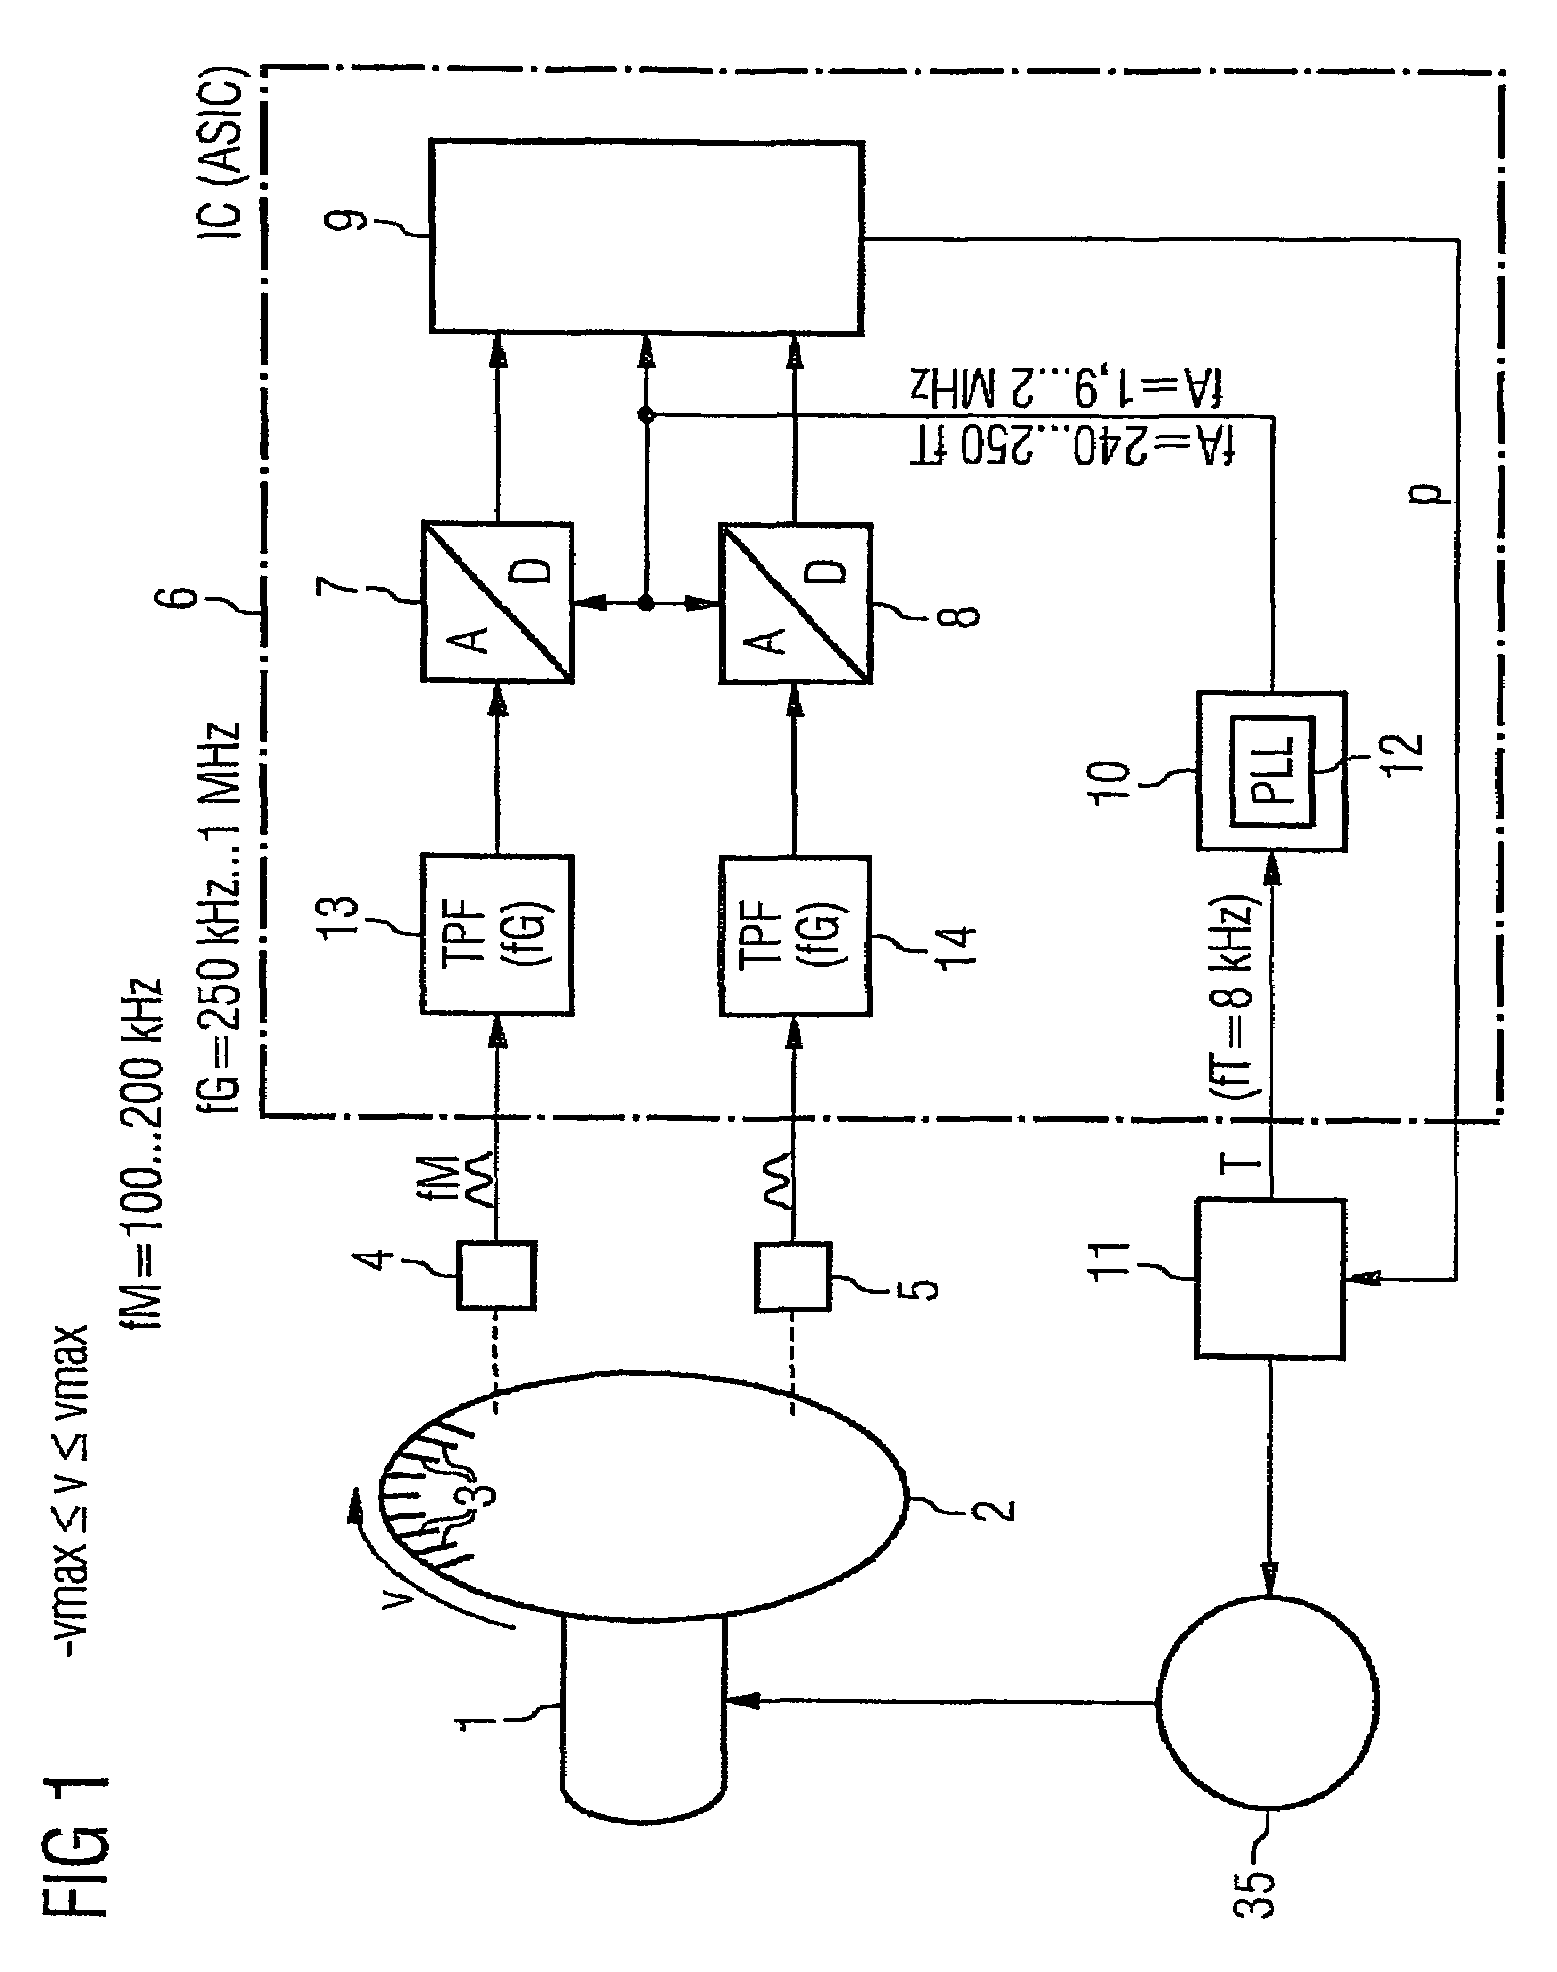 Method for the evaluation of a first analog signal and a second analog signal, and evaluation circuit corresponding therewith